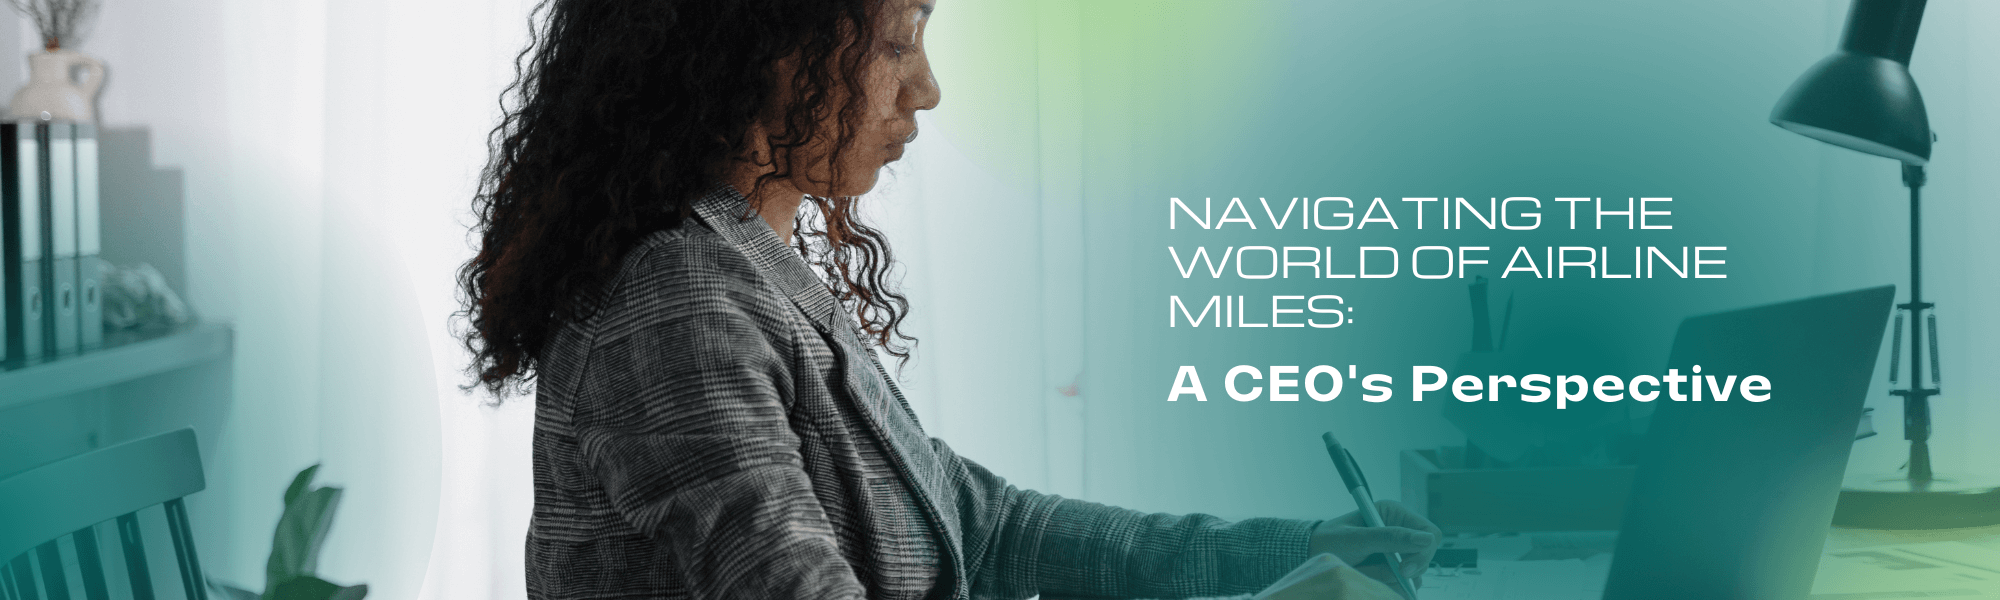 Unlocking Value: How Sell My Miles Delivers for Customers